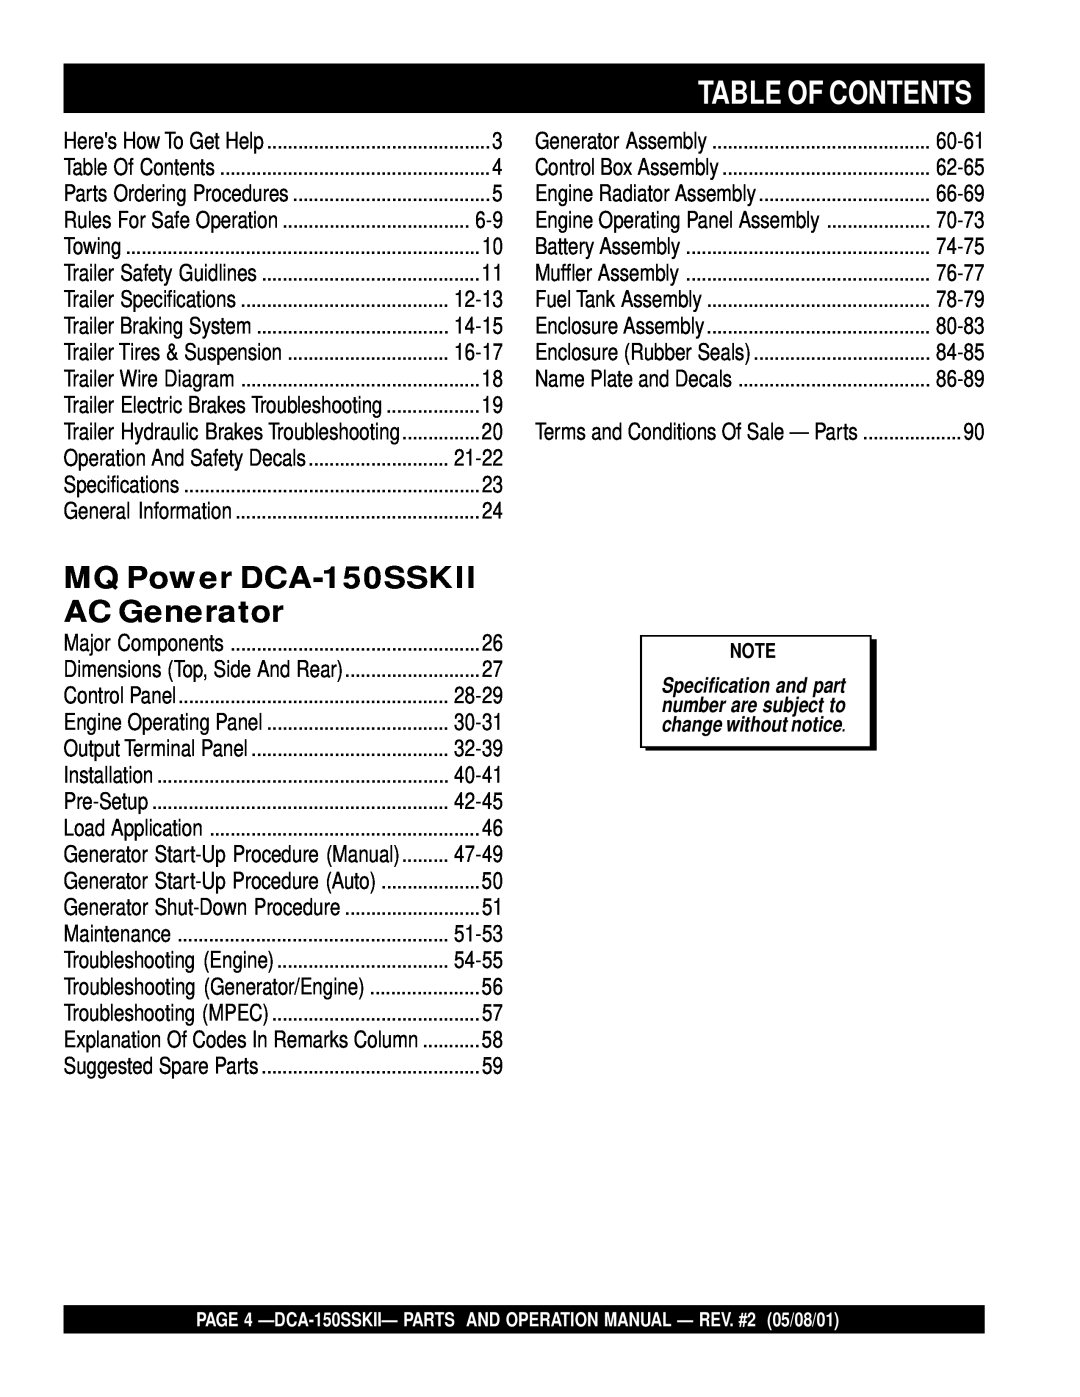 Multiquip operation manual Table Of Contents, MQ Power DCA-150SSKII AC Generator 